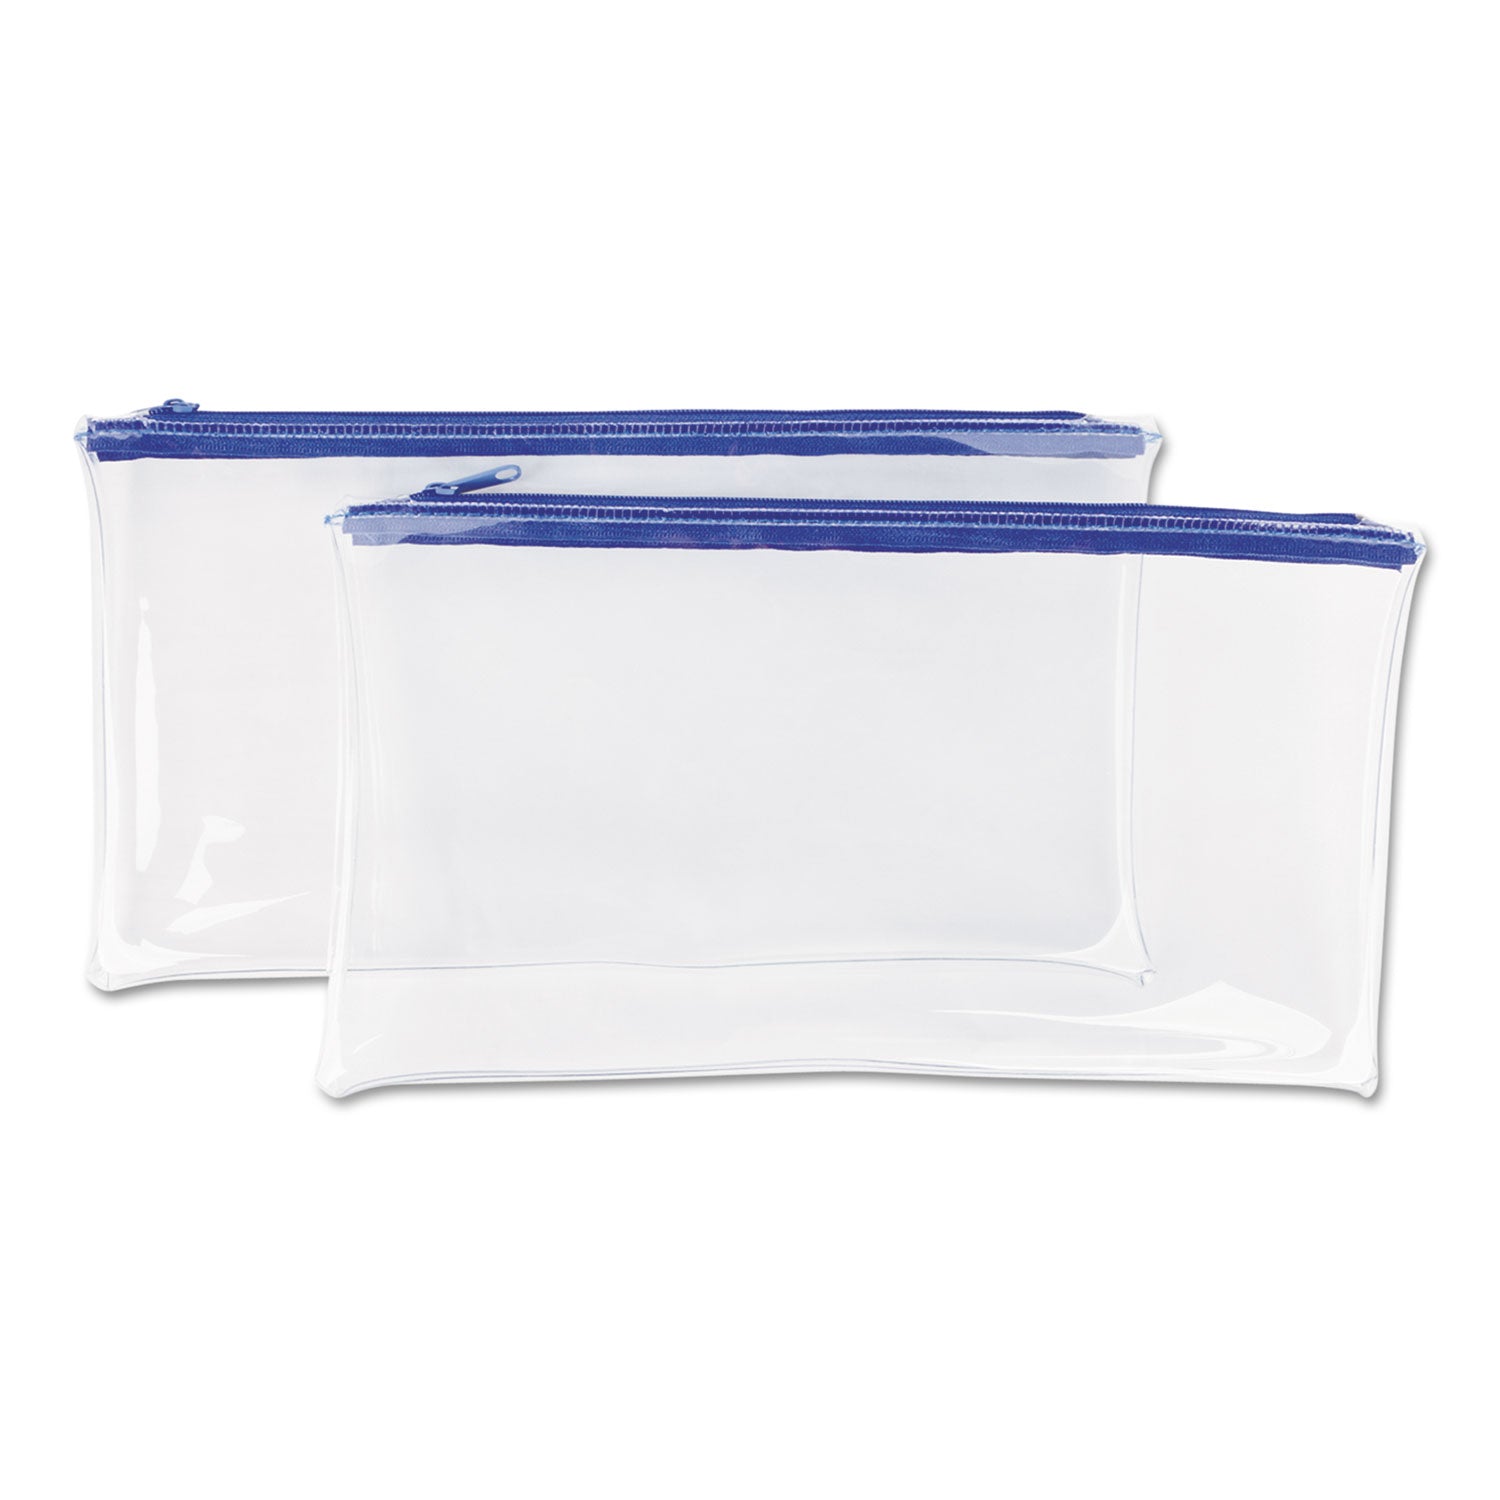 zippered-wallets-cases-transparent-plastic-11-x-6-clear-blue-2-pack_unv69025 - 1